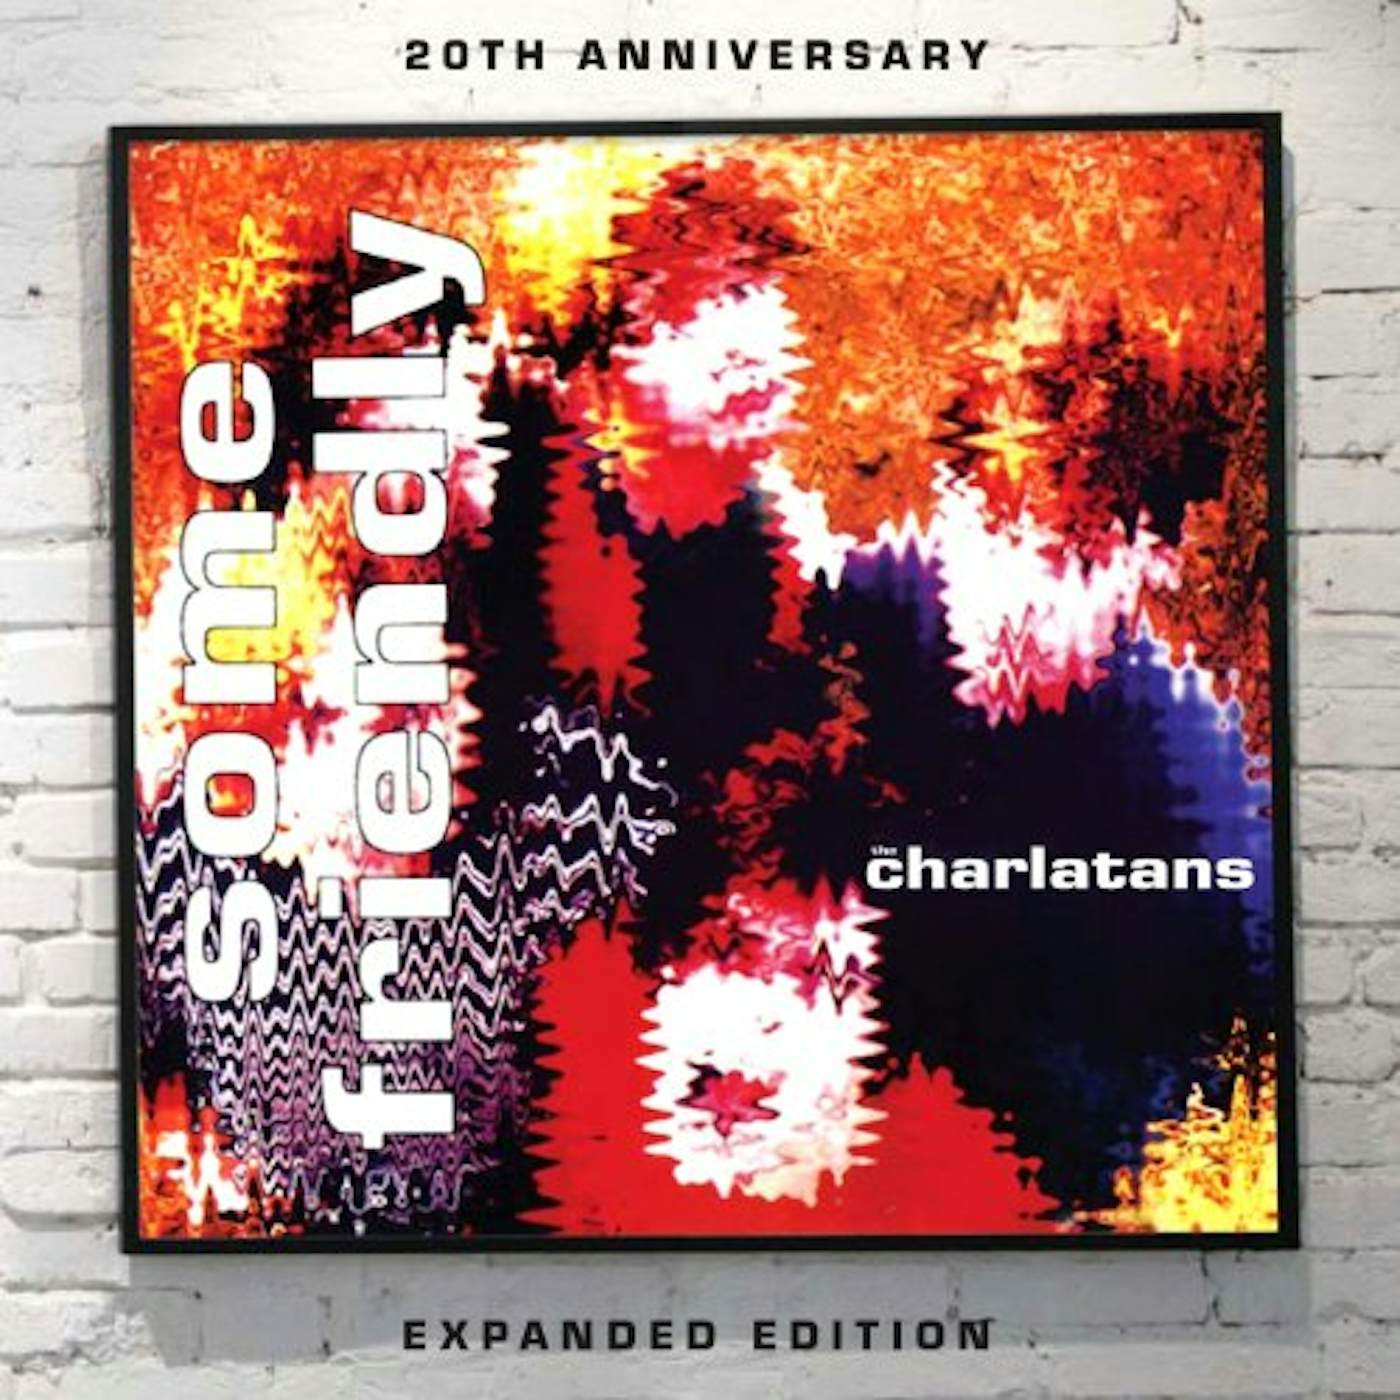 The Charlatans SOME FRIENDLY (20TH ANNIVERSARY) CD